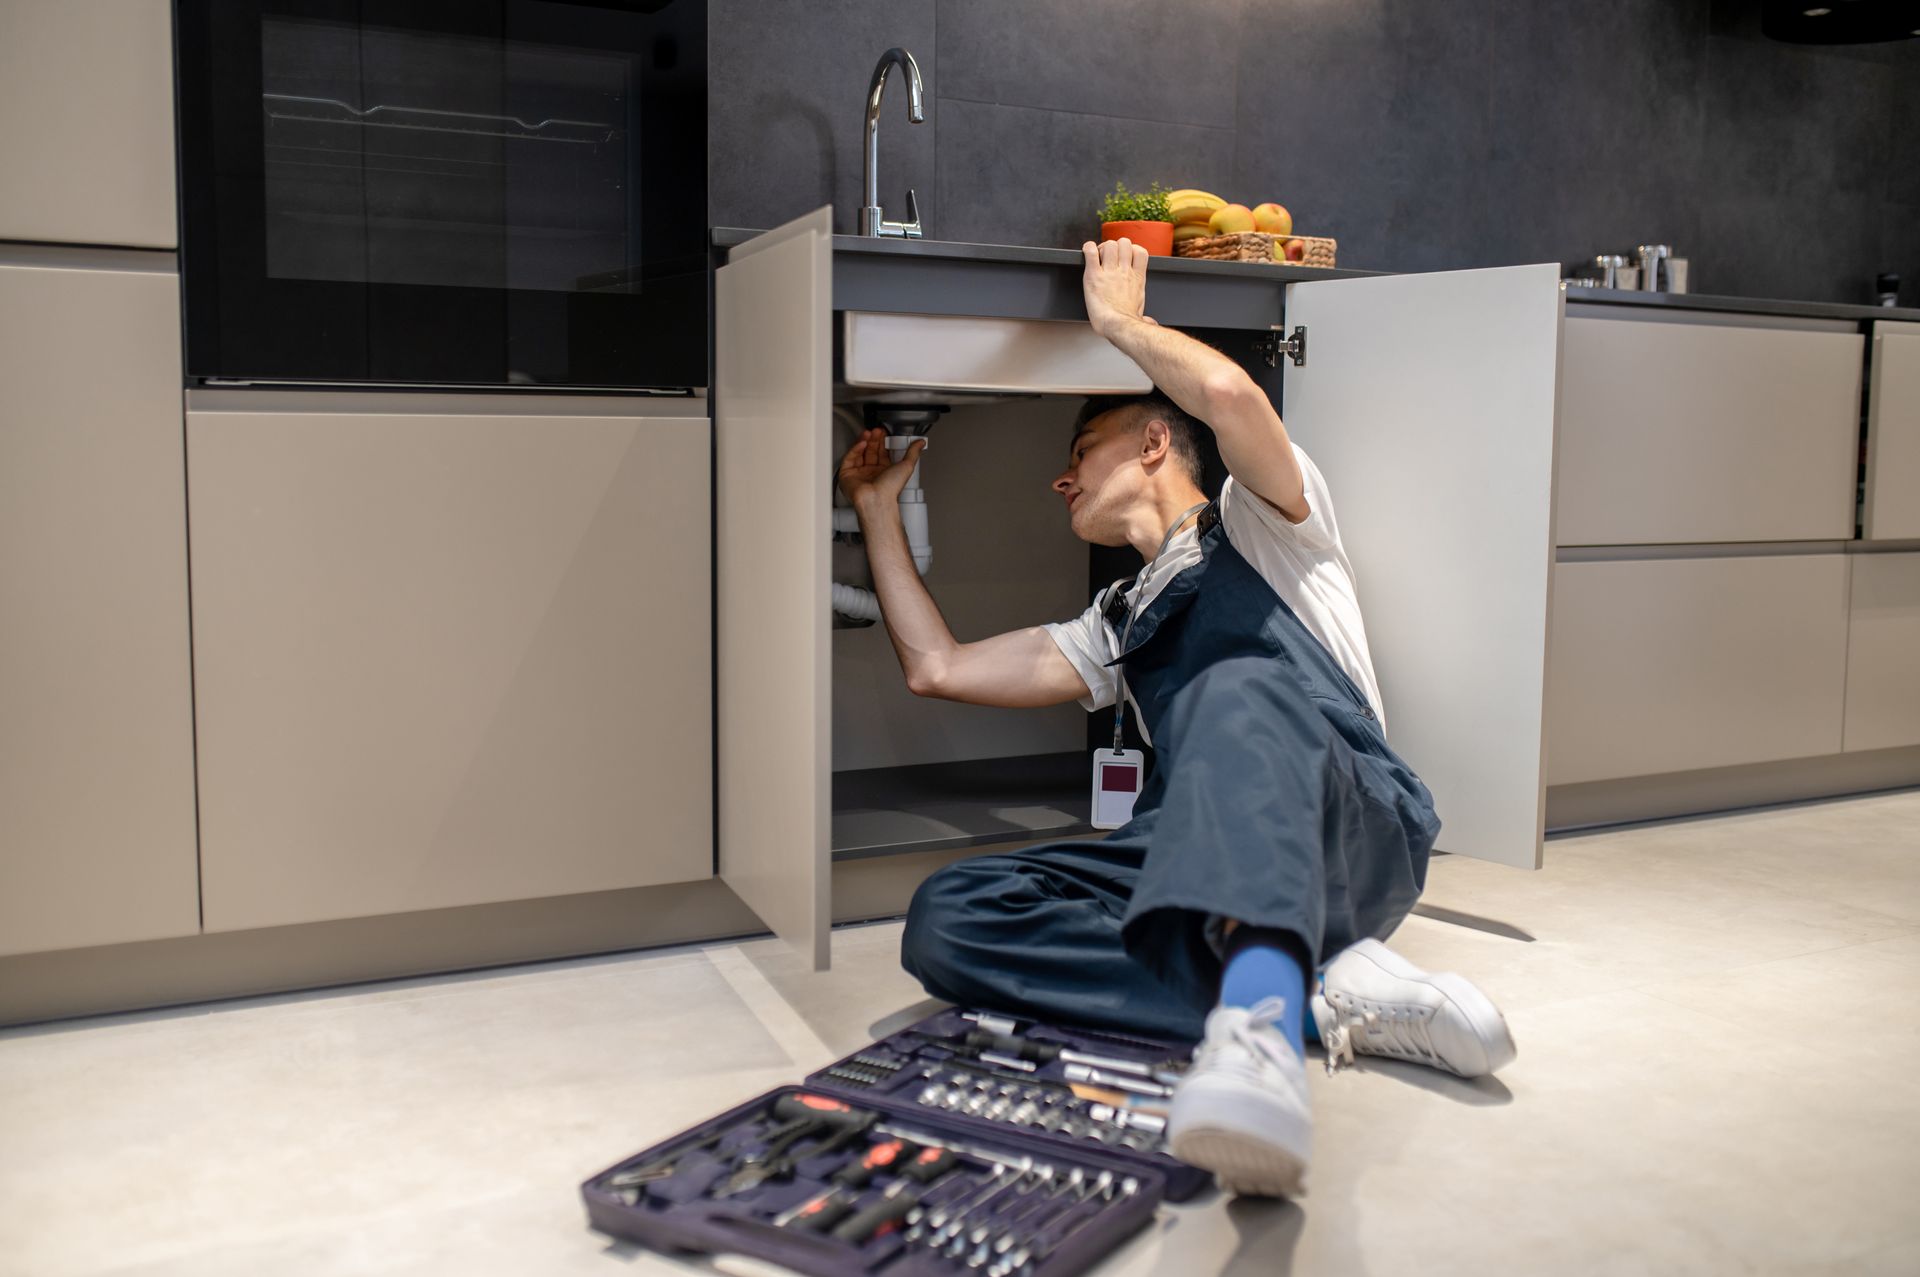 A man is kneeling on the floor fixing a sink in a kitchen.